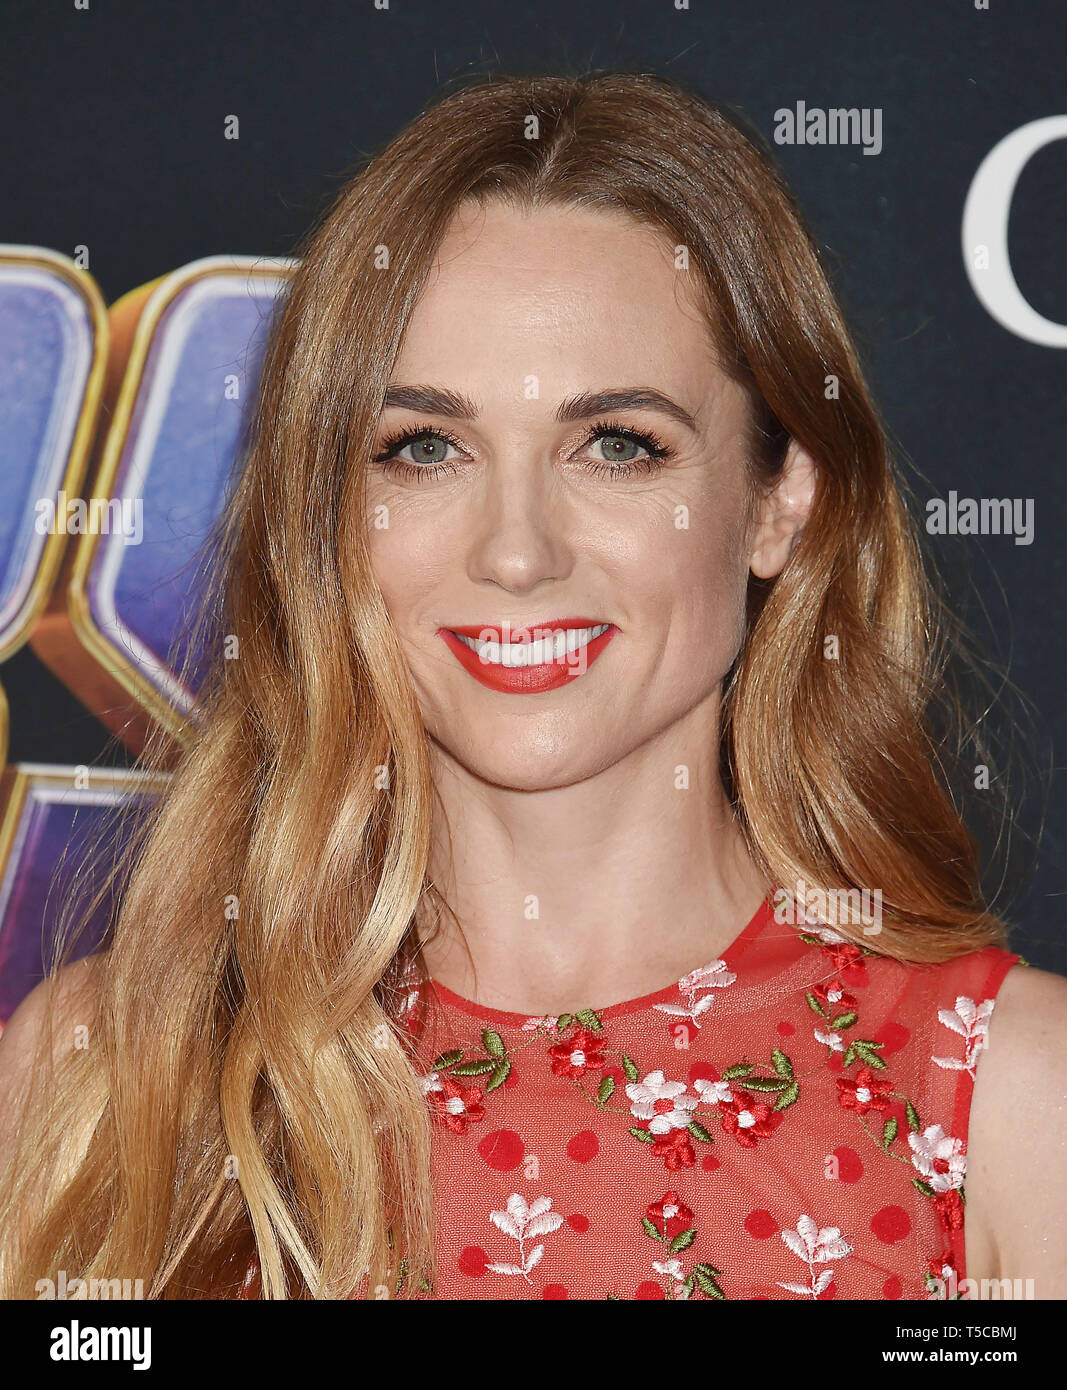 LOS ANGELES, CA - APRIL 22: Kerry Condon arrives at the world premiere Of Walt Disney Studios Motion Pictures 'Avengers: Endgame' at the Los Angeles Convention Center on April 22, 2019 in Los Angeles, California. Stock Photo